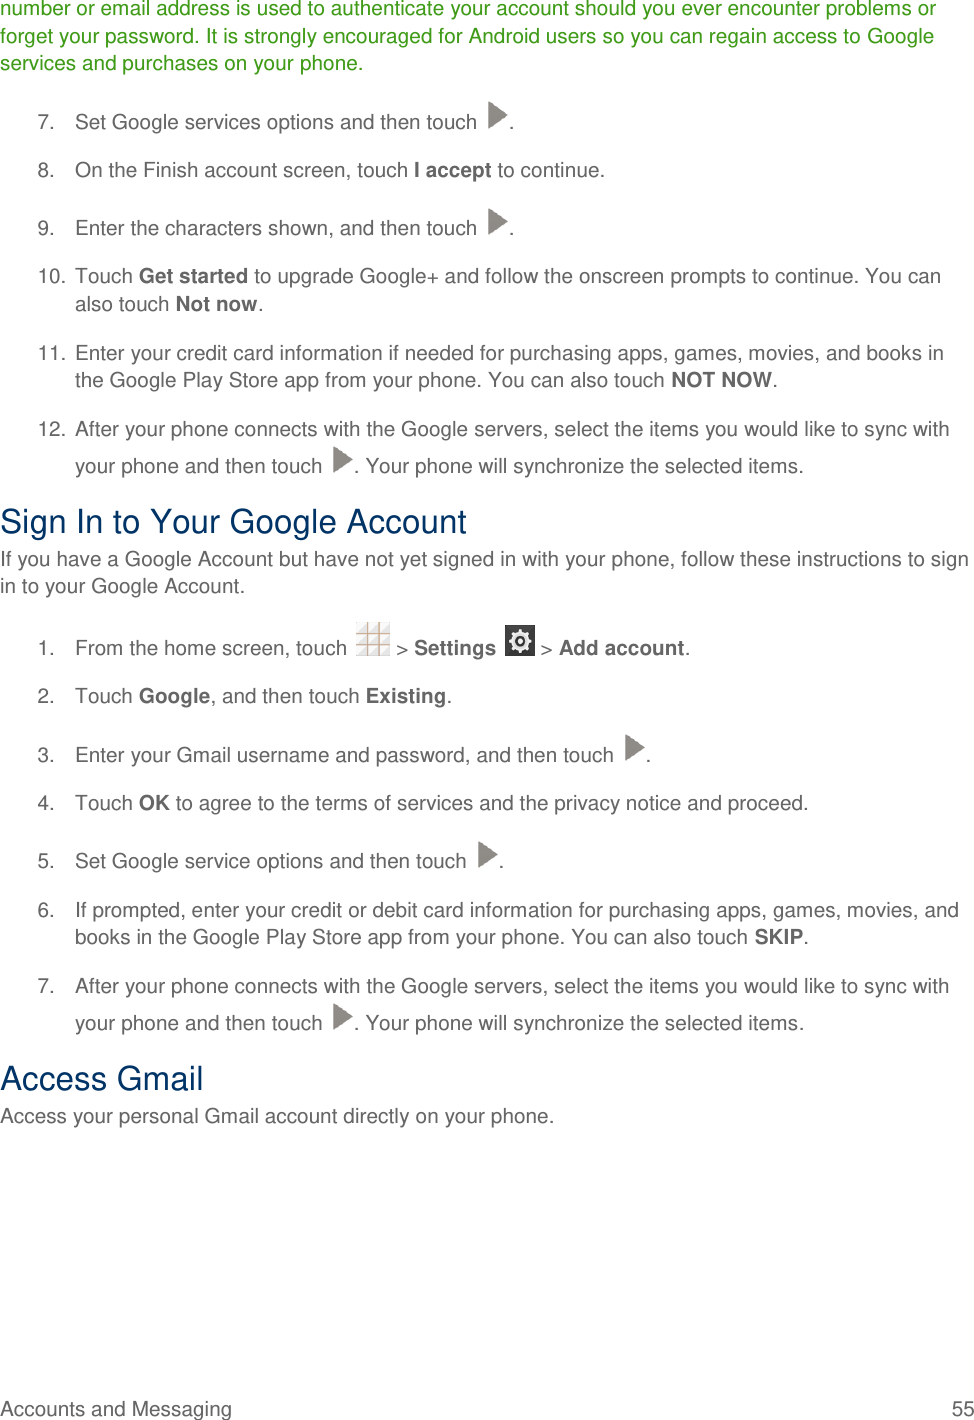 Accounts and Messaging  55 number or email address is used to authenticate your account should you ever encounter problems or forget your password. It is strongly encouraged for Android users so you can regain access to Google services and purchases on your phone. 7.  Set Google services options and then touch  . 8.  On the Finish account screen, touch I accept to continue. 9.  Enter the characters shown, and then touch  . 10. Touch Get started to upgrade Google+ and follow the onscreen prompts to continue. You can also touch Not now. 11. Enter your credit card information if needed for purchasing apps, games, movies, and books in the Google Play Store app from your phone. You can also touch NOT NOW. 12. After your phone connects with the Google servers, select the items you would like to sync with your phone and then touch  . Your phone will synchronize the selected items. Sign In to Your Google Account If you have a Google Account but have not yet signed in with your phone, follow these instructions to sign in to your Google Account. 1.  From the home screen, touch   &gt; Settings   &gt; Add account. 2.  Touch Google, and then touch Existing.  3.  Enter your Gmail username and password, and then touch  . 4.  Touch OK to agree to the terms of services and the privacy notice and proceed. 5.  Set Google service options and then touch  . 6.  If prompted, enter your credit or debit card information for purchasing apps, games, movies, and books in the Google Play Store app from your phone. You can also touch SKIP. 7.  After your phone connects with the Google servers, select the items you would like to sync with your phone and then touch  . Your phone will synchronize the selected items.  Access Gmail Access your personal Gmail account directly on your phone. 